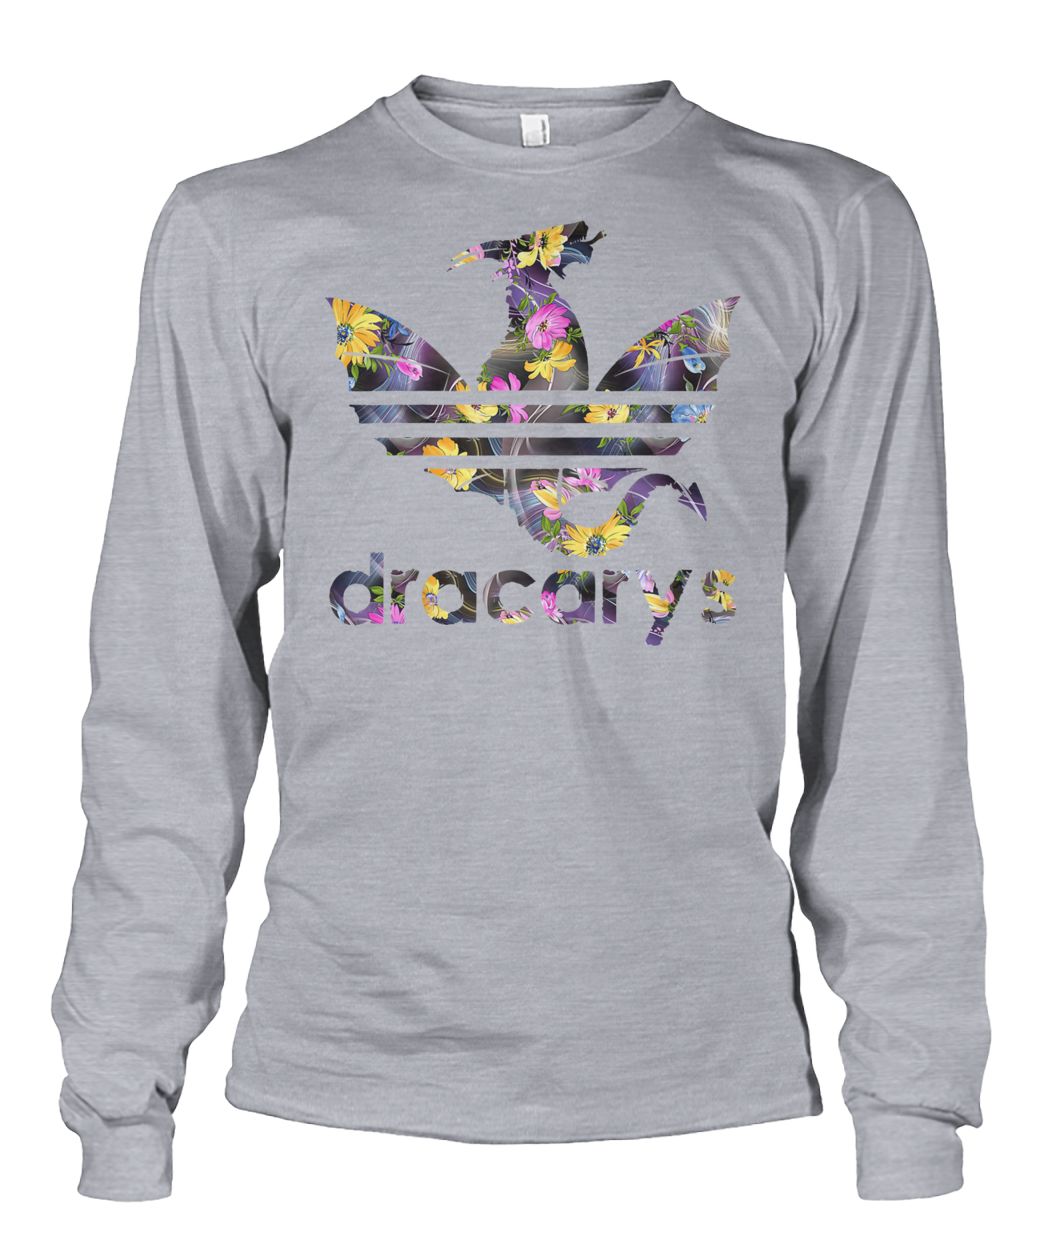 Floral flower game of thrones dragon dracarys unisex long sleeve